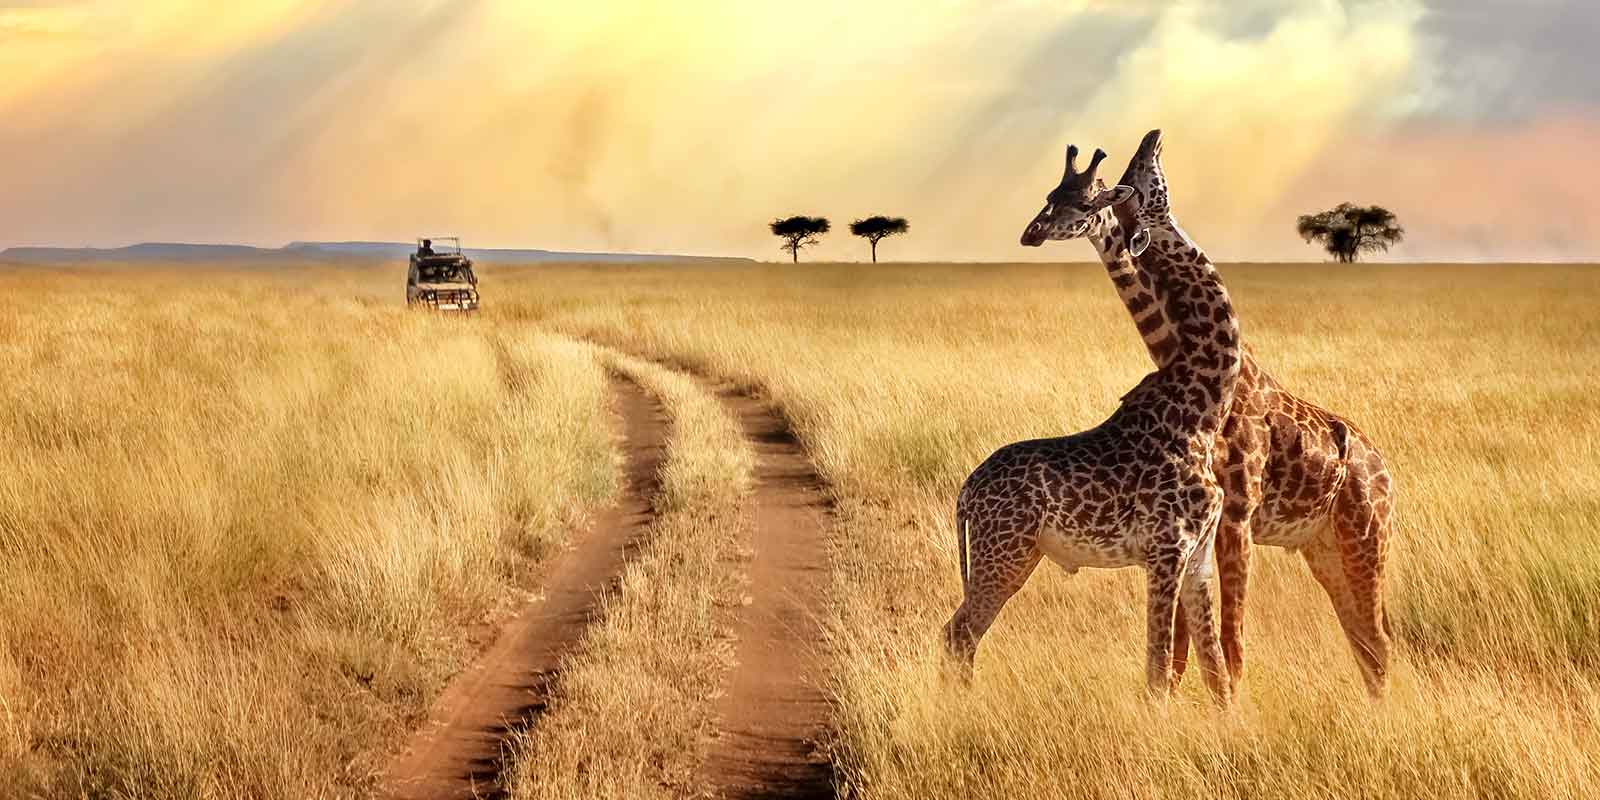 Two giraffes in a field in Africa with a safari jeep in the background